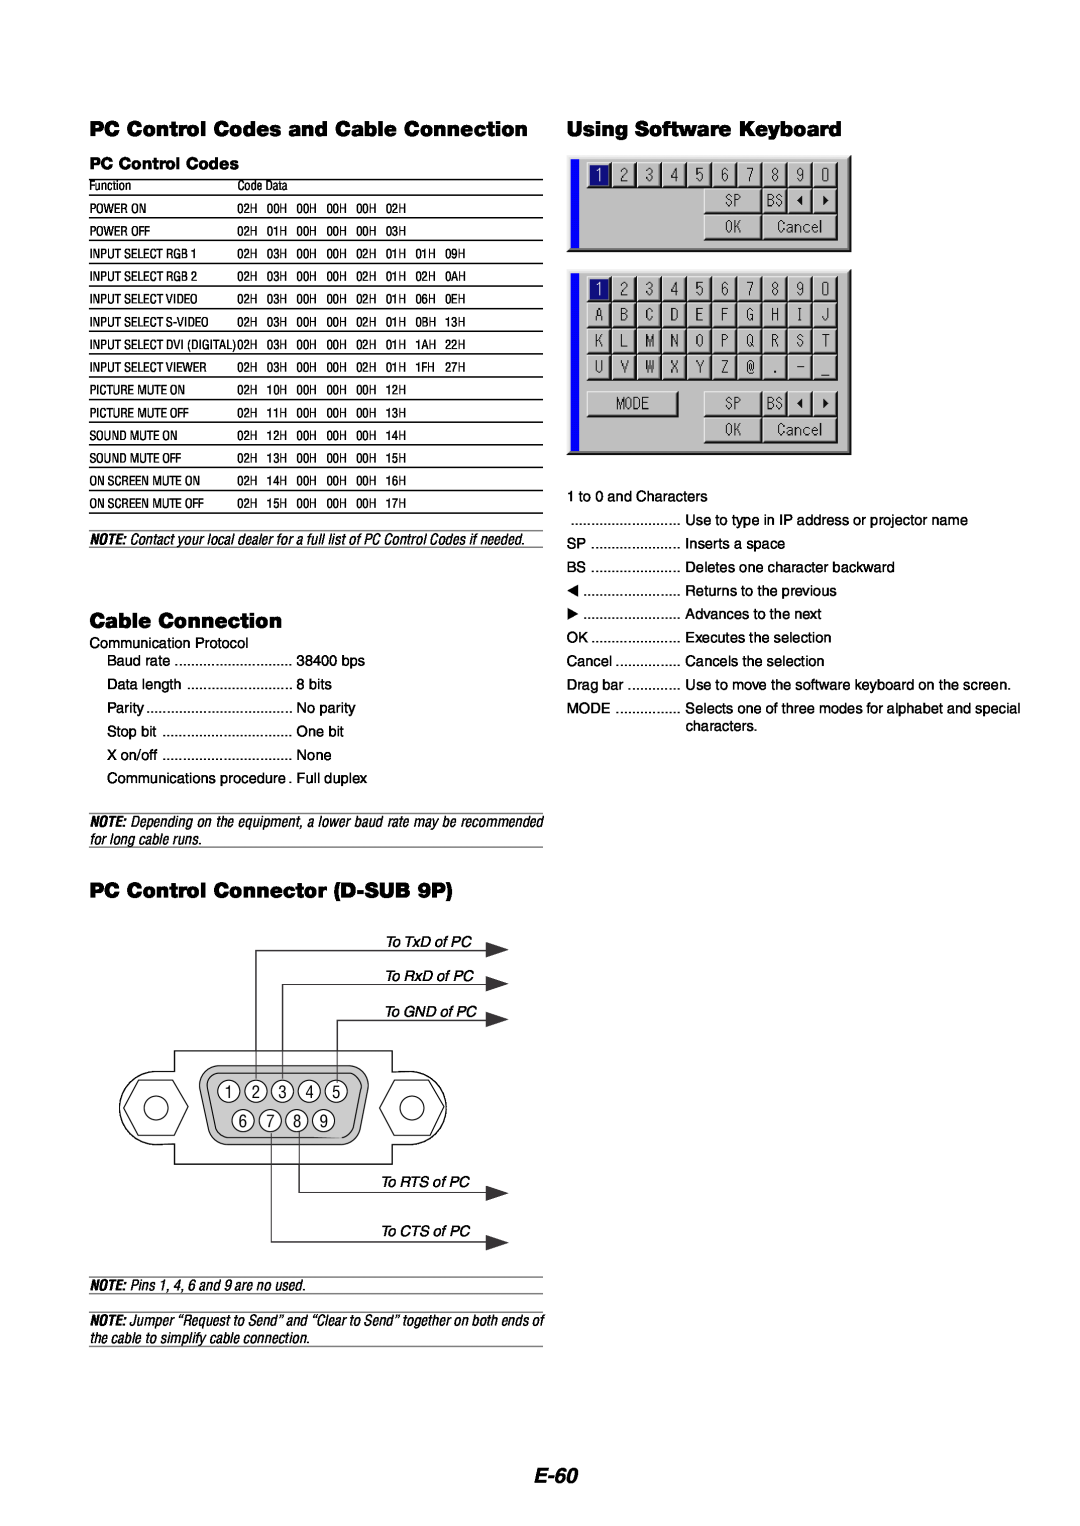 NEC MT1060 user manual PC Control Codes and Cable Connection, PC Control Connector D-SUB9P, Using Software Keyboard, E-60 